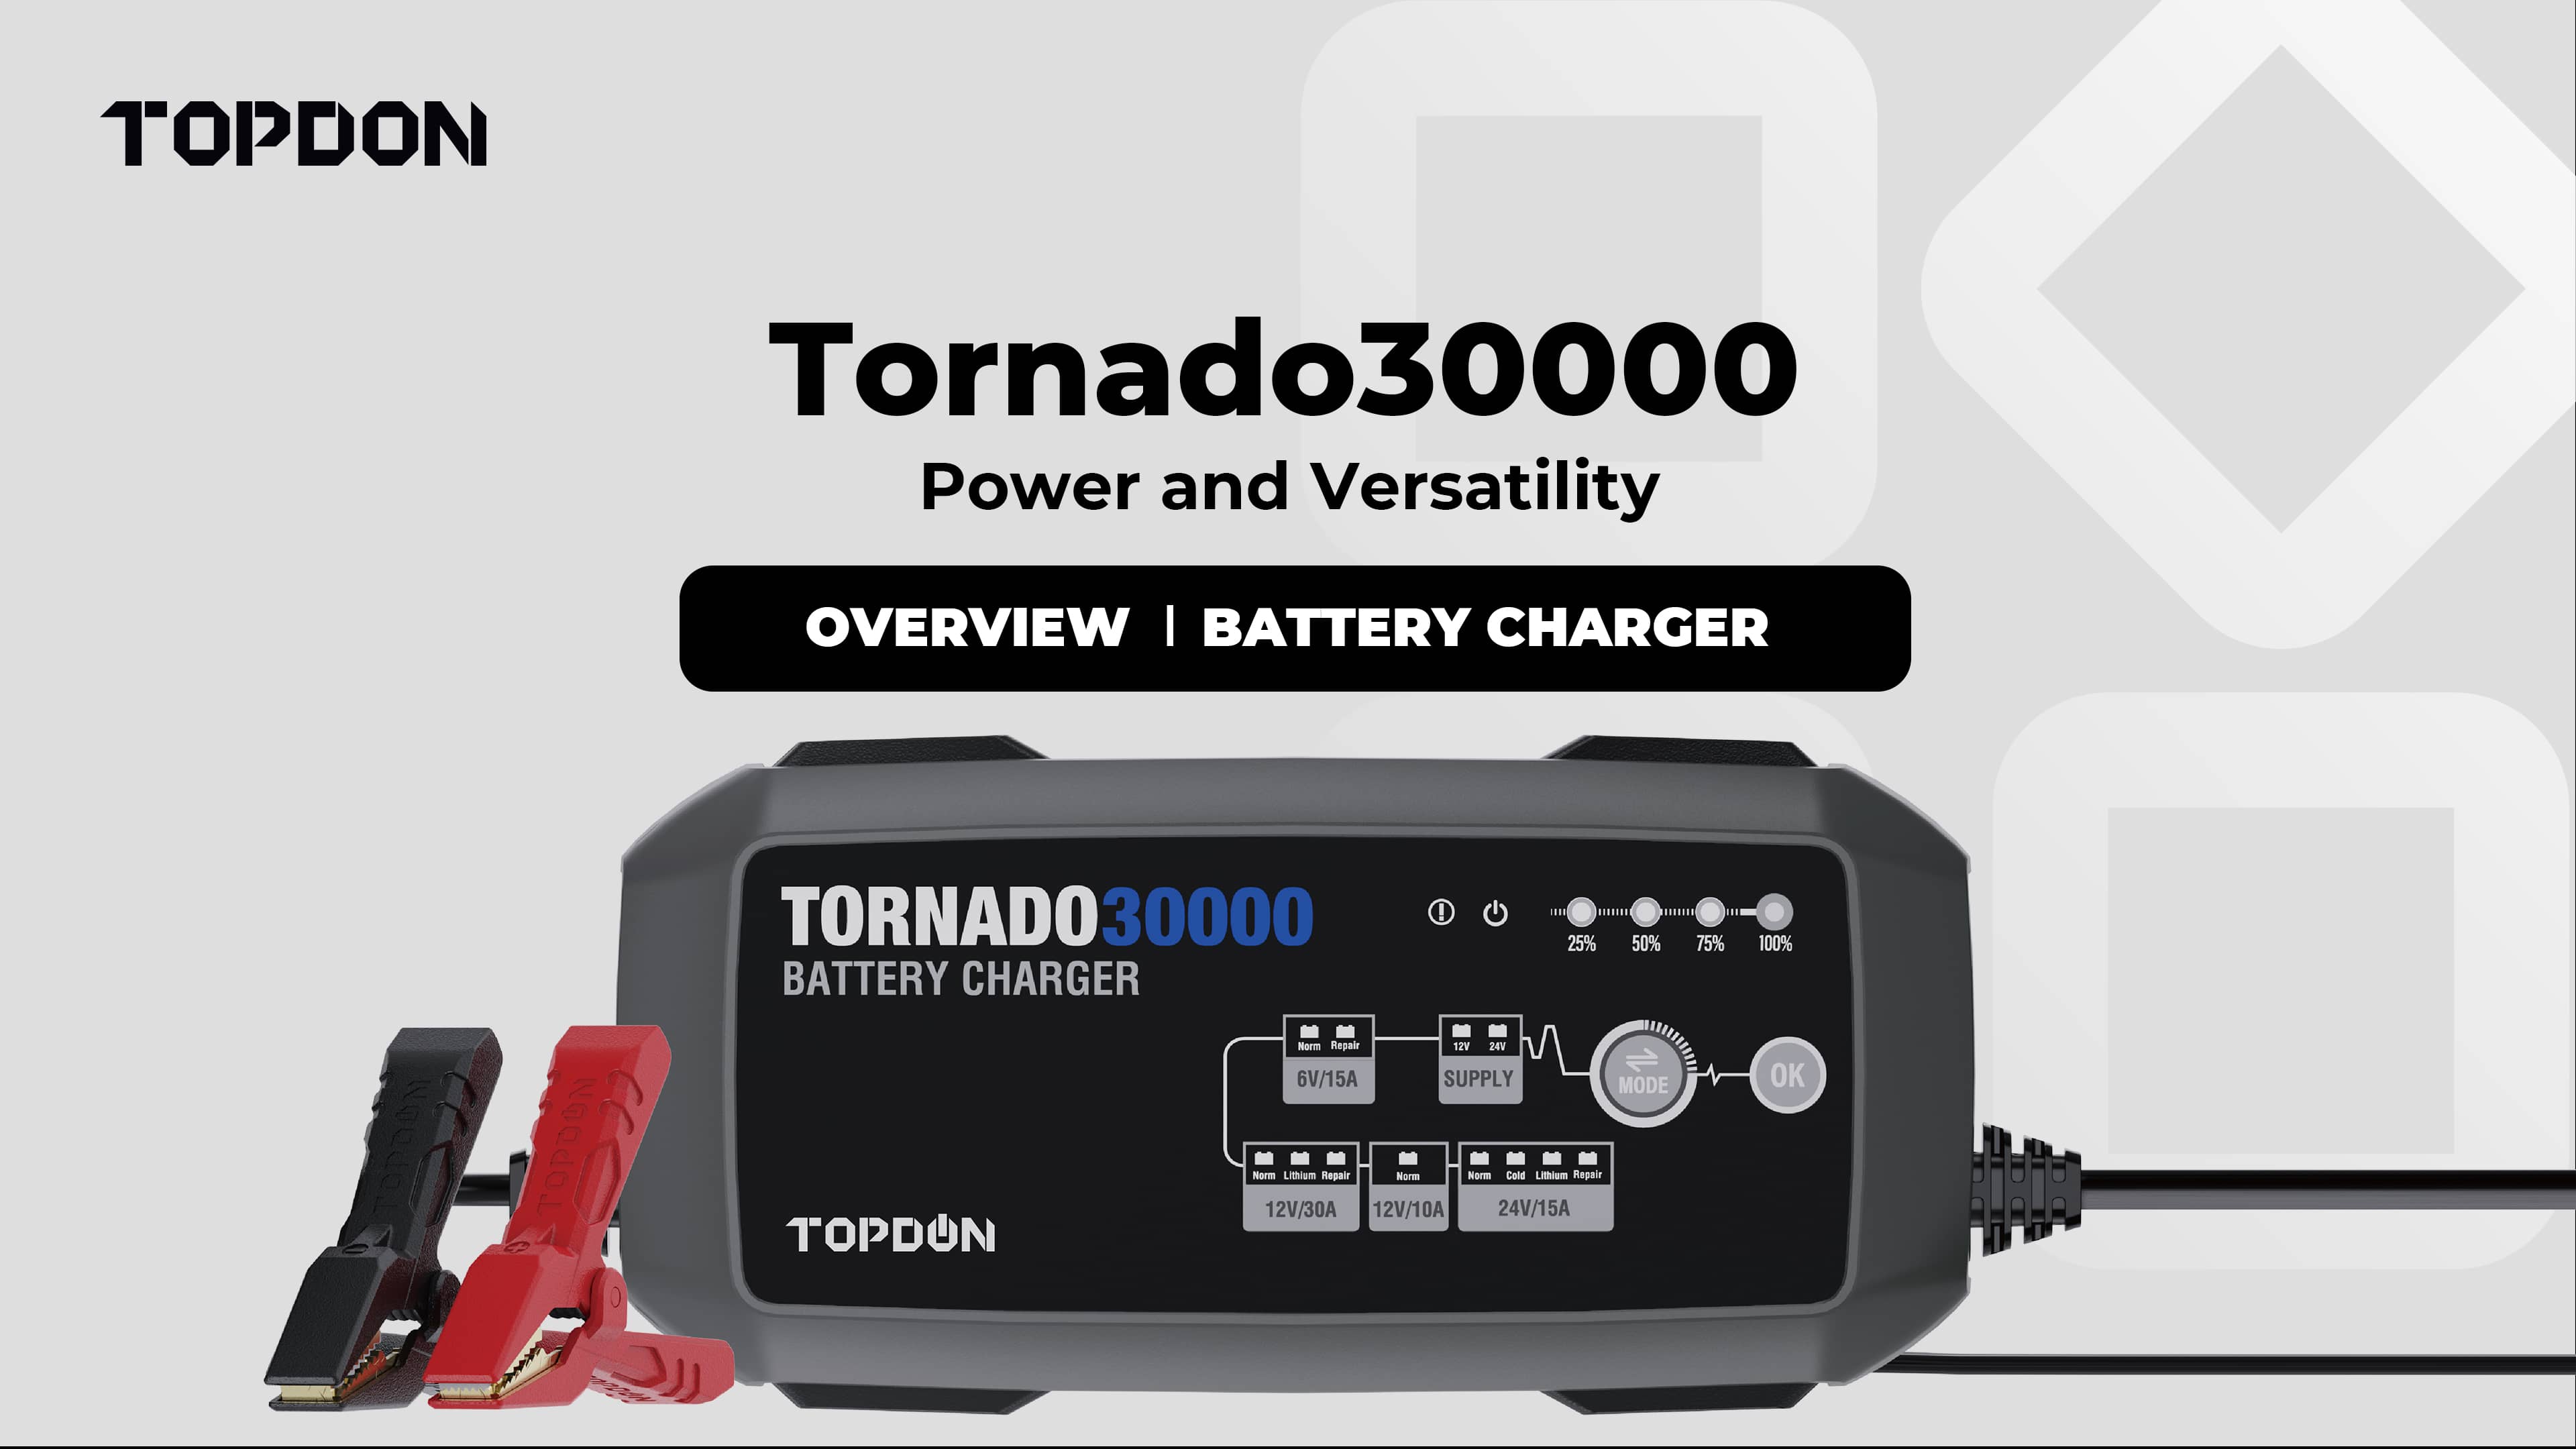 TOPDON | Tornado30000 | Overview | Battery Charger